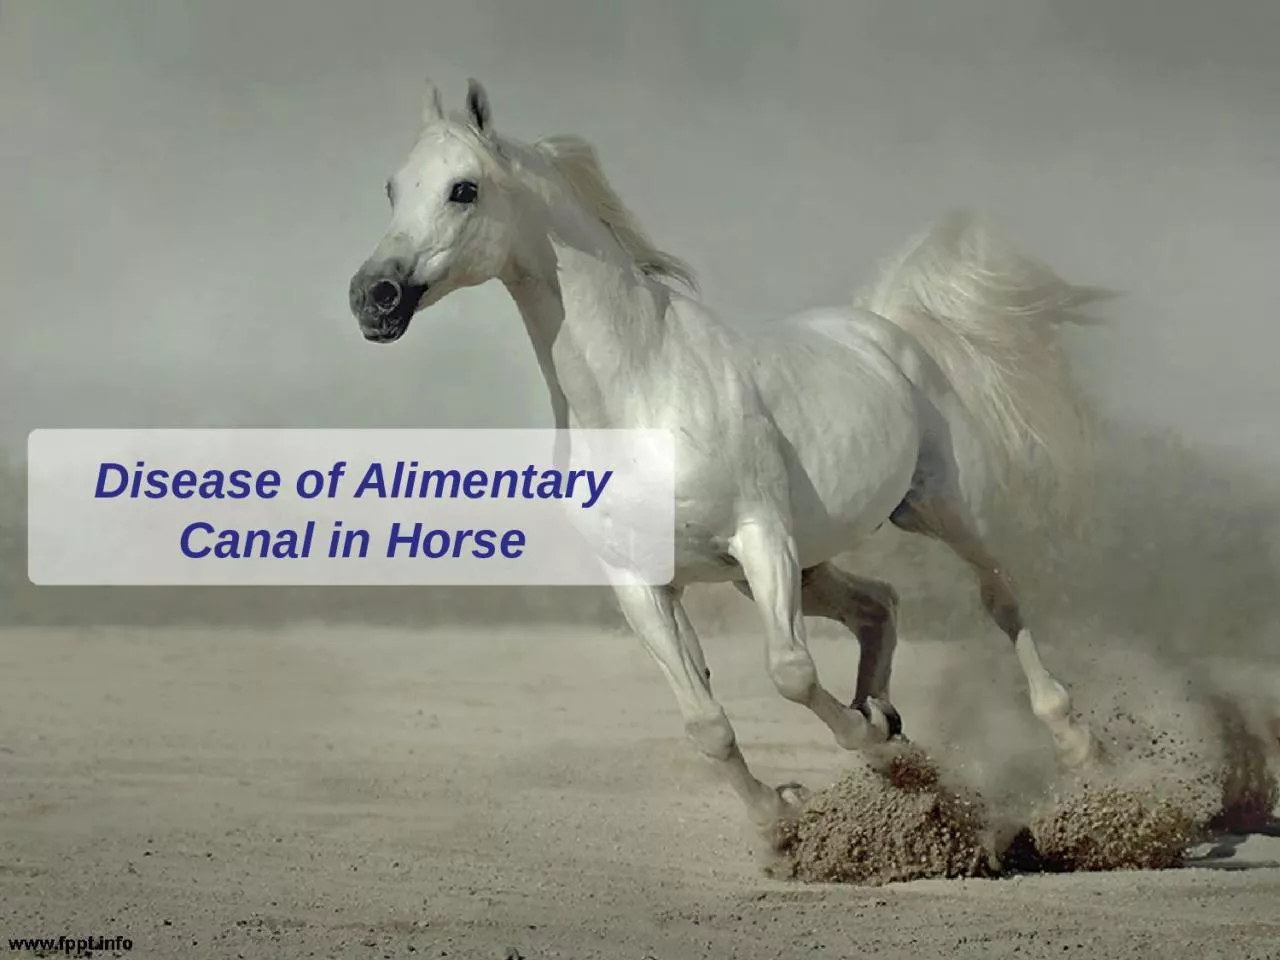 Disease of Alimentary Canal in Horse